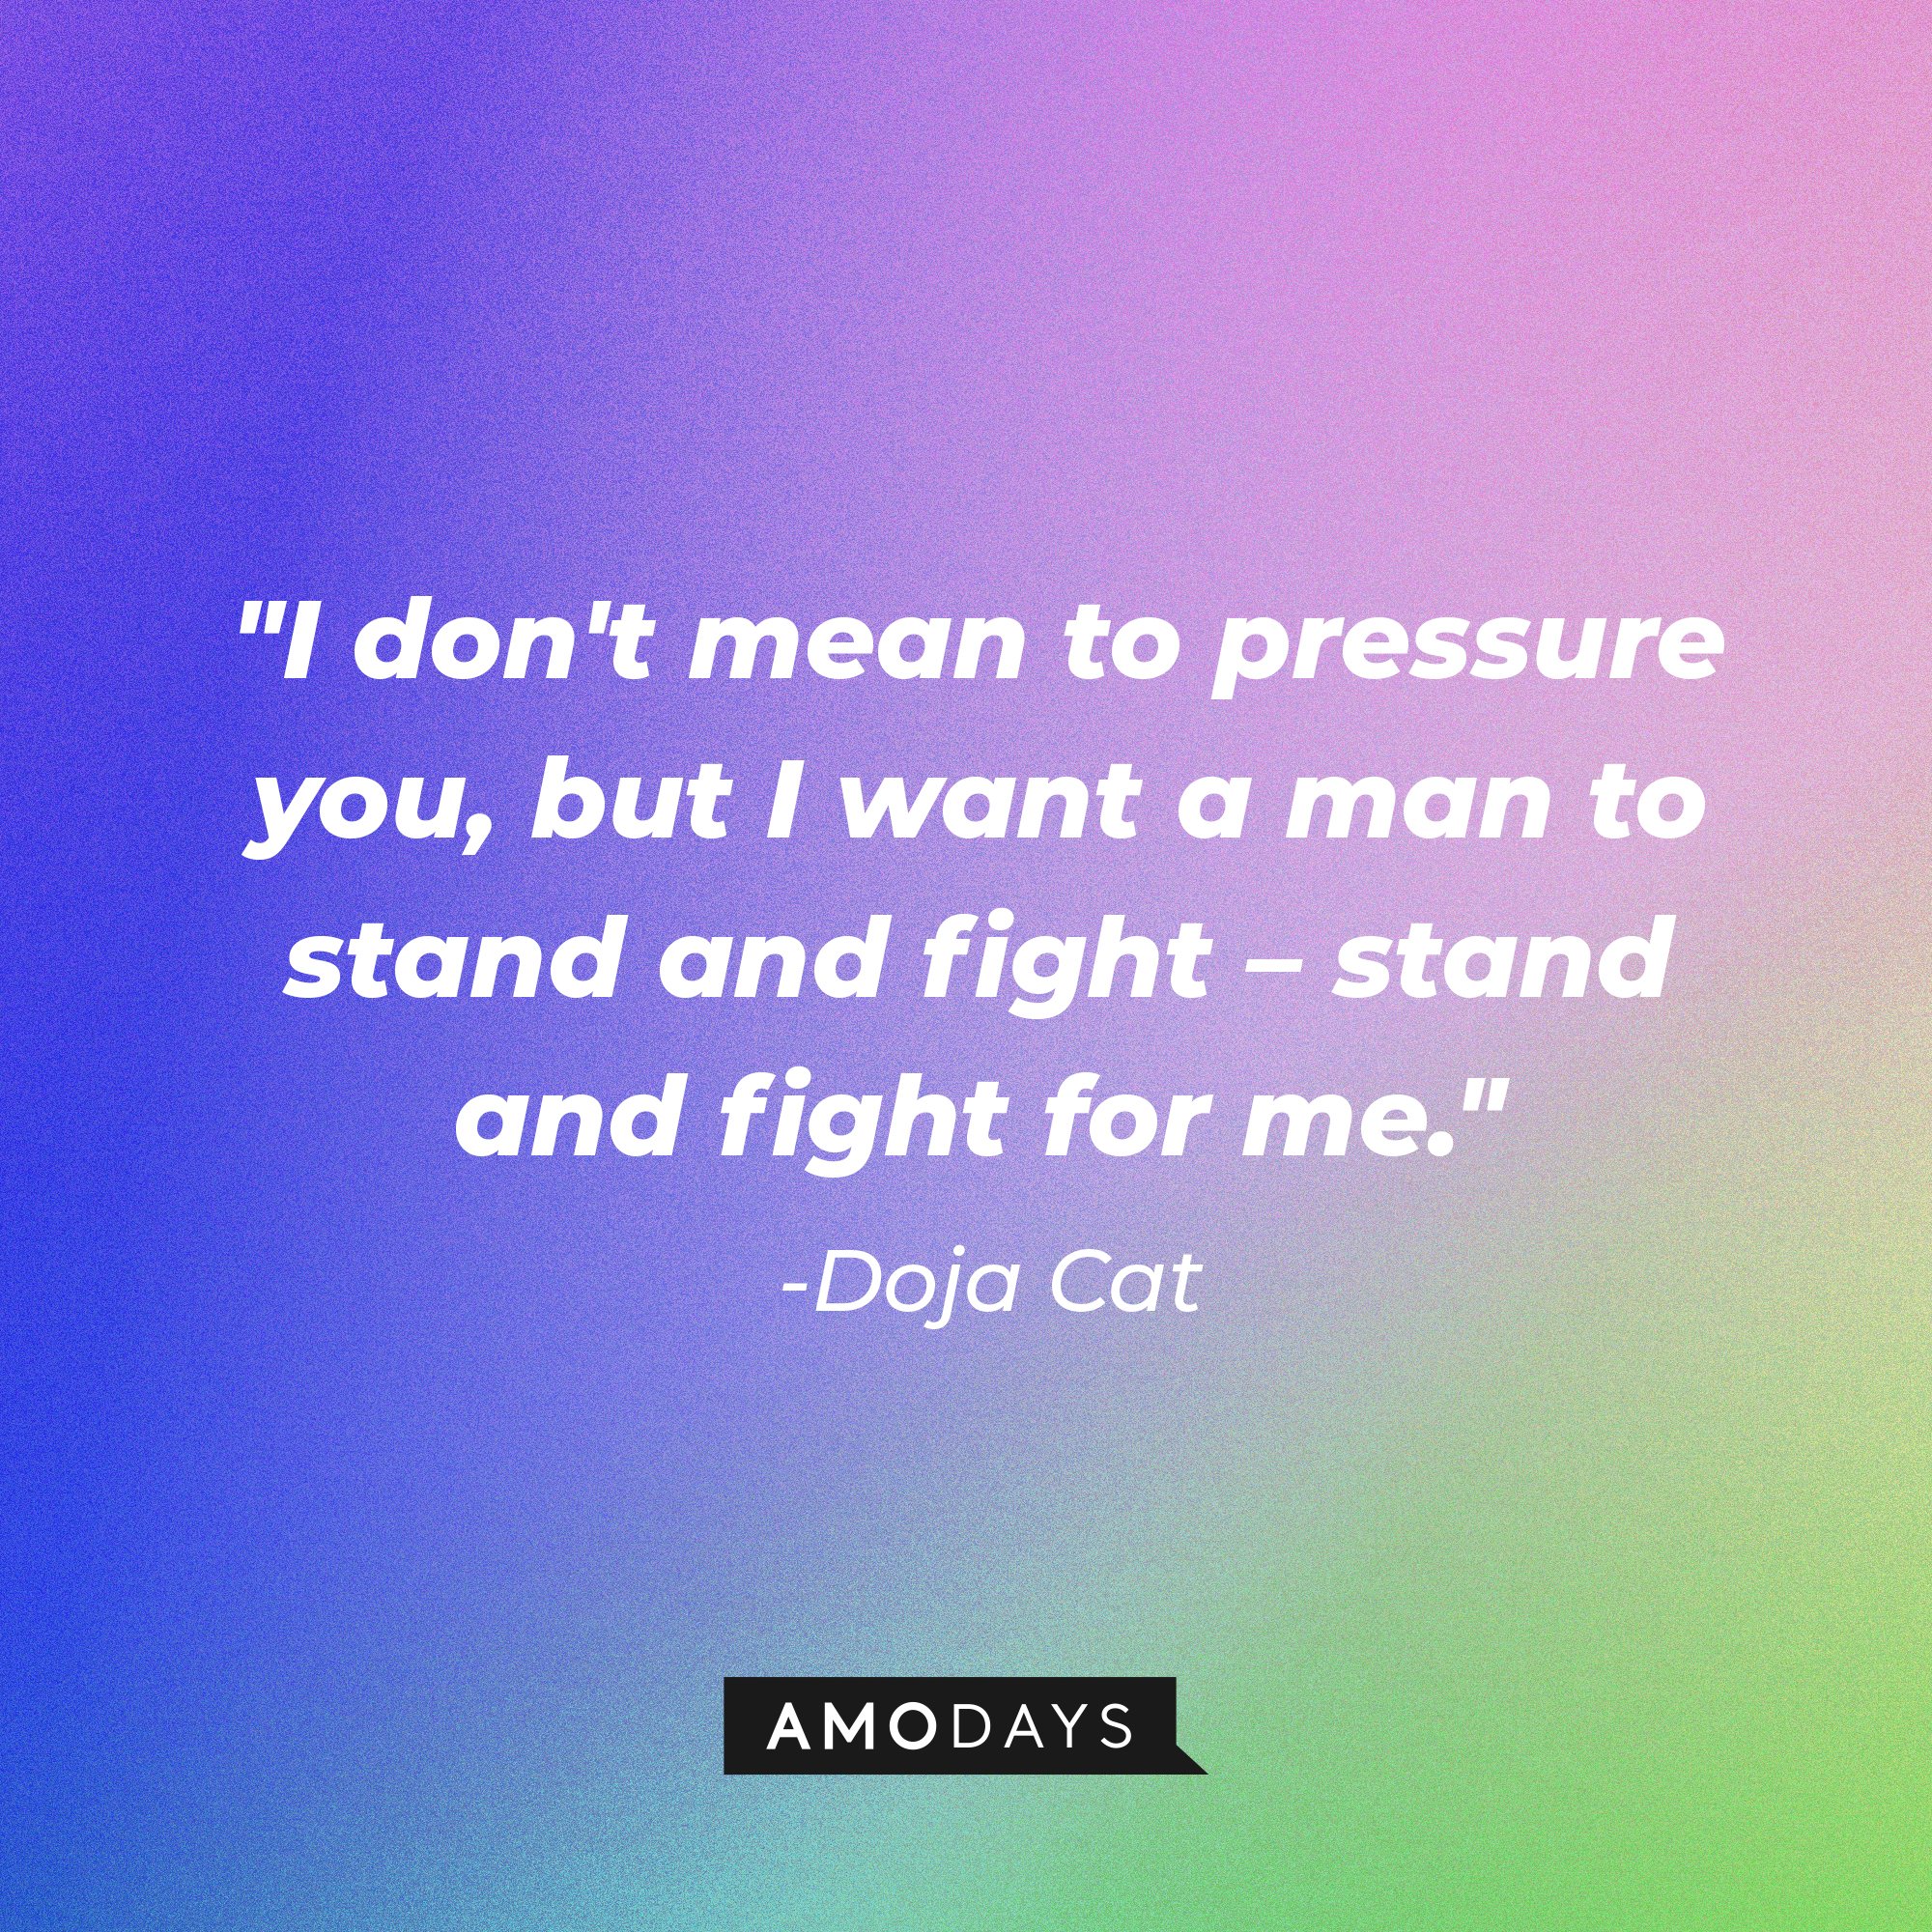 Doja Cat's quote: "I don't mean to pressure you, but I want a man to stand and fight – stand and fight for me." | Image: AmoDays